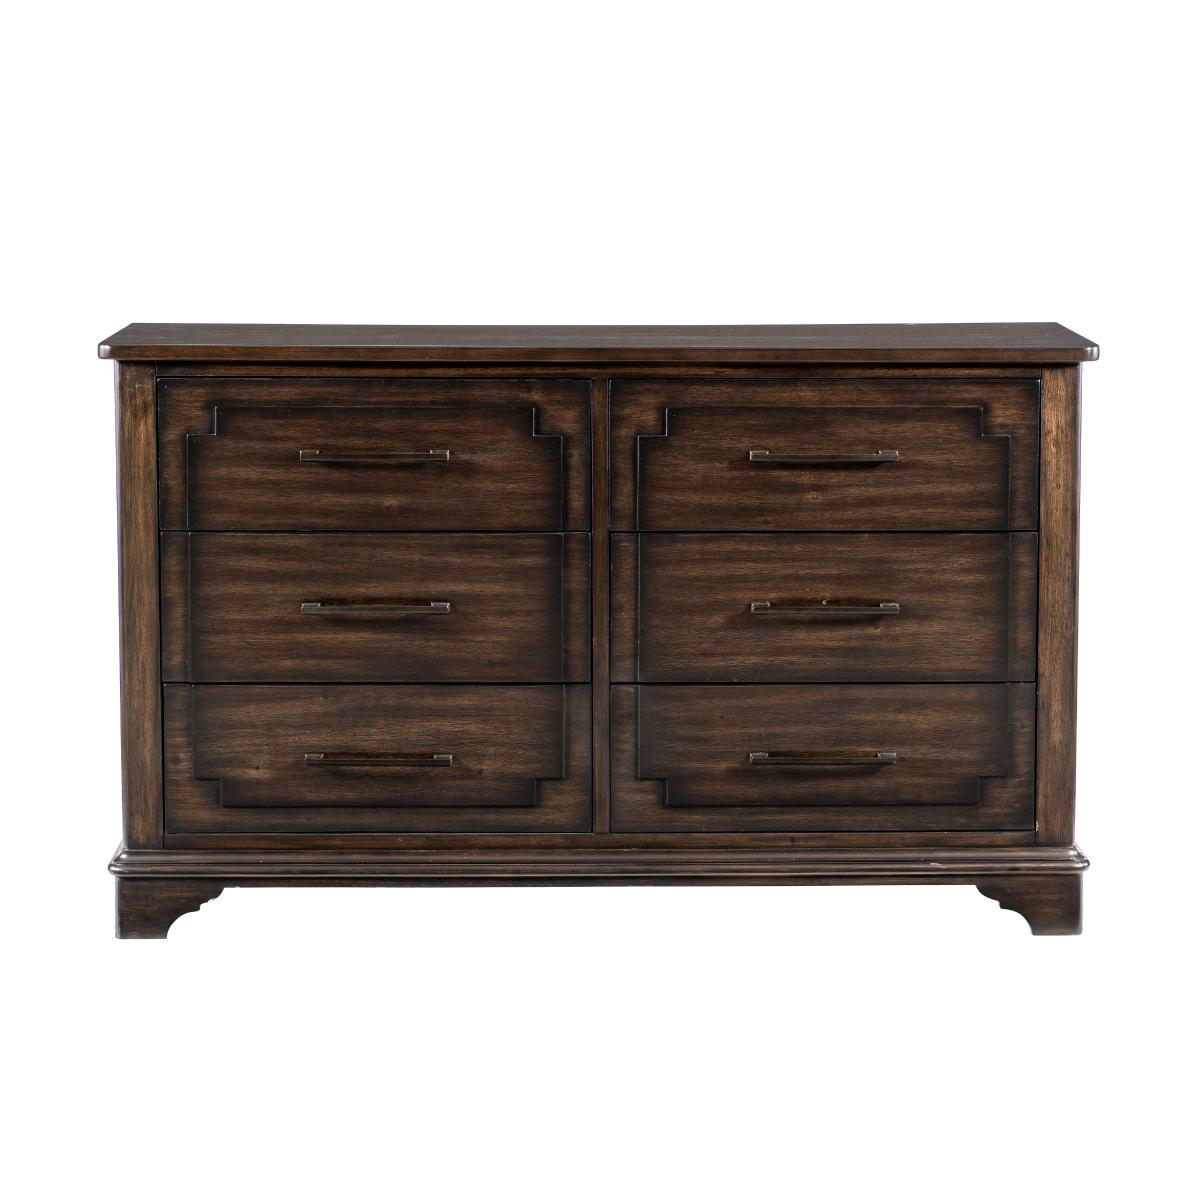 Traditional Dresser 1406-5 1406-5 in Rustic Brown 